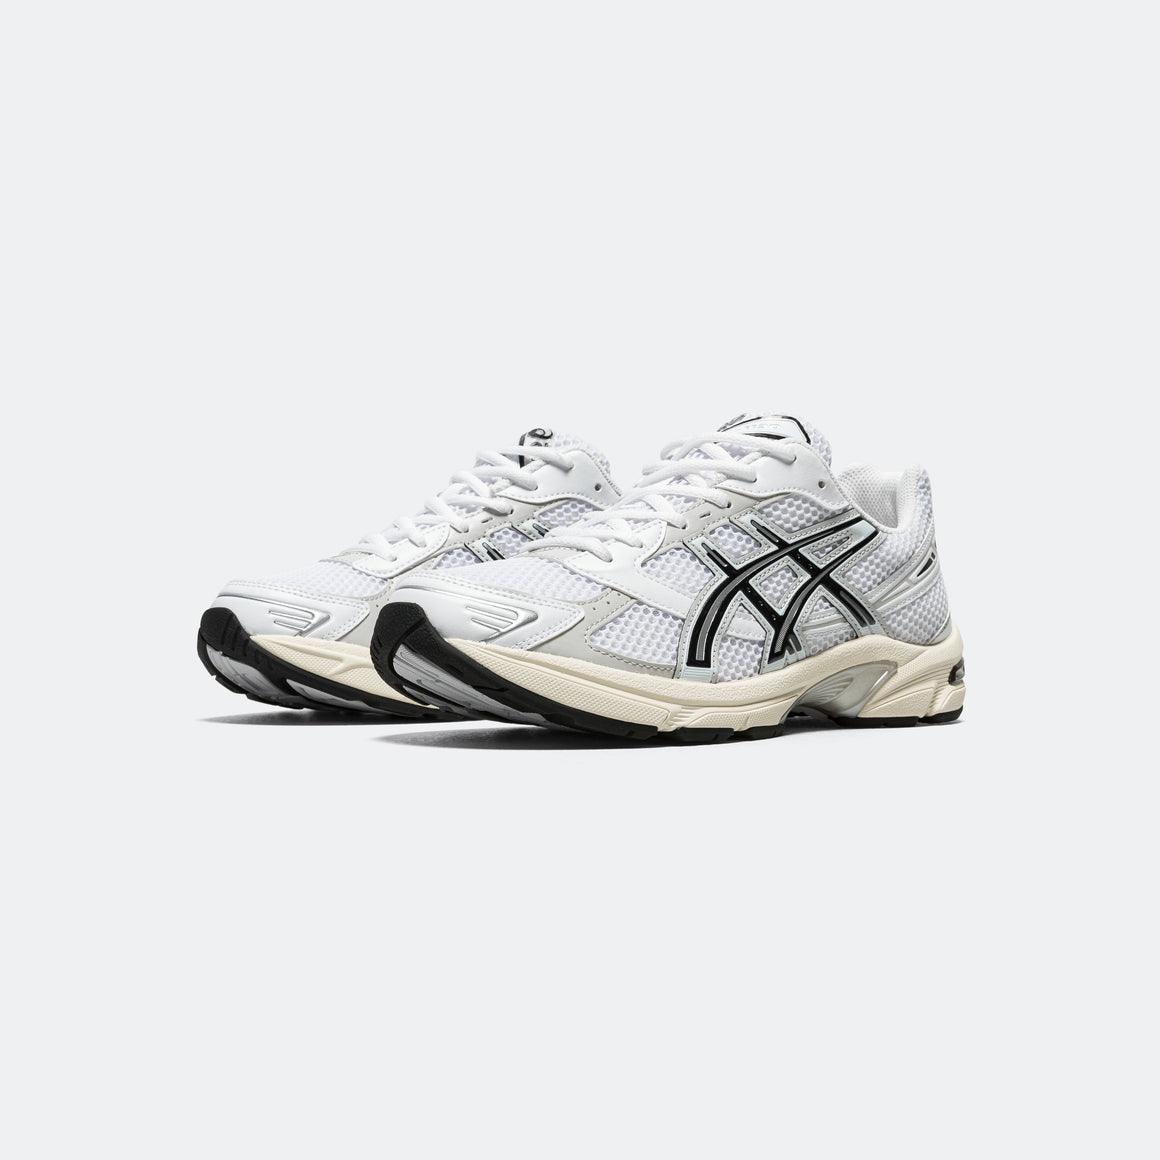 Asics - GEL-1130 - White/Cloud Grey - UP THERE